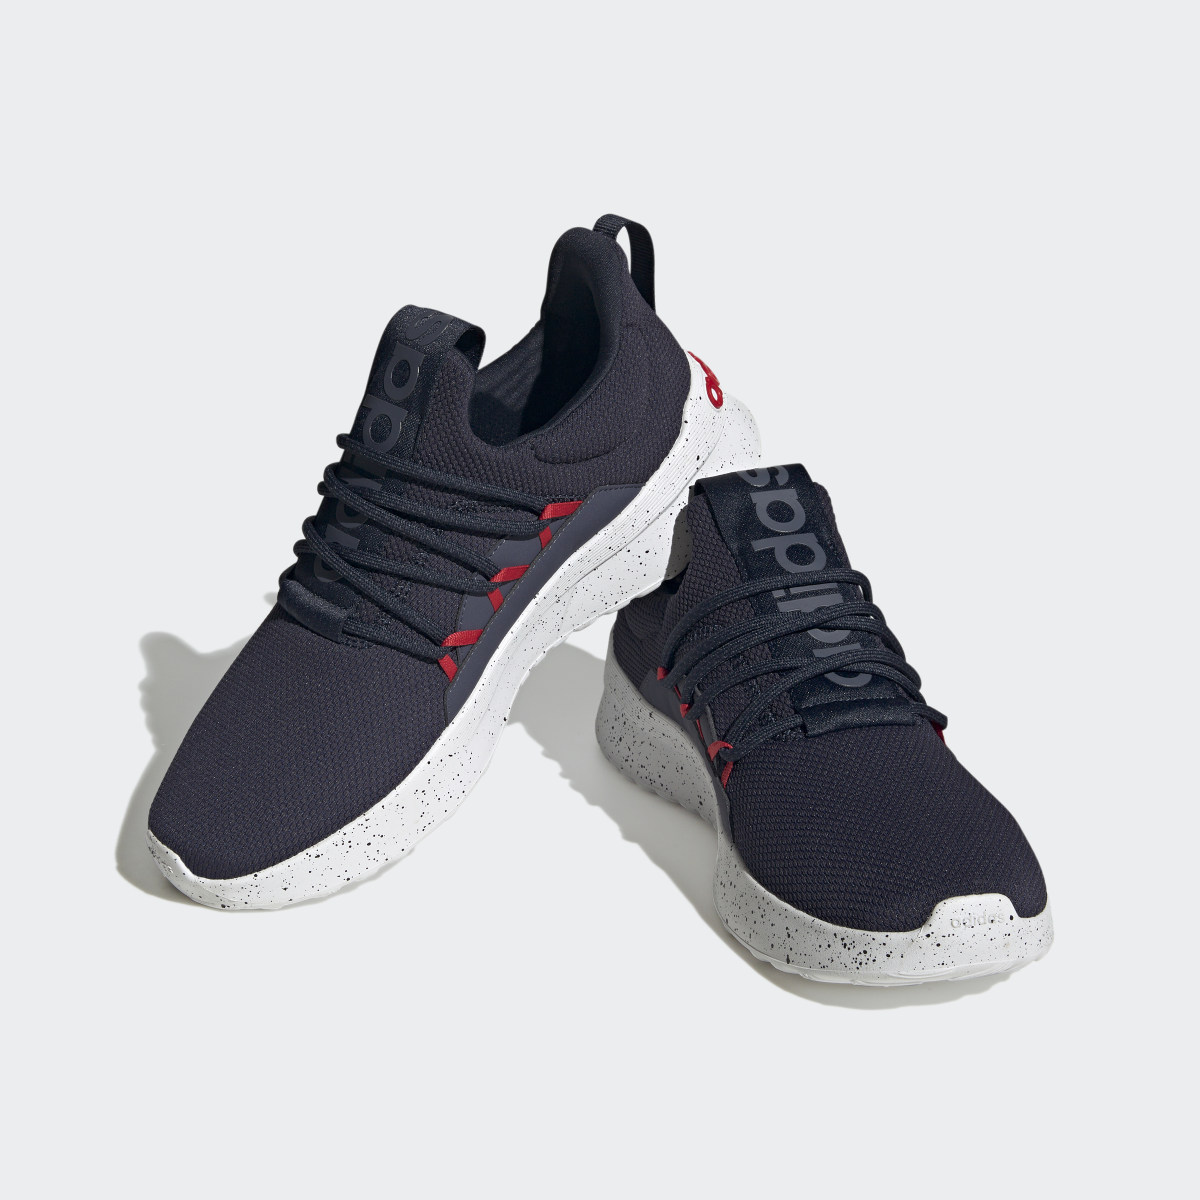 Adidas Lite Racer Adapt 5.0 Shoes. 5